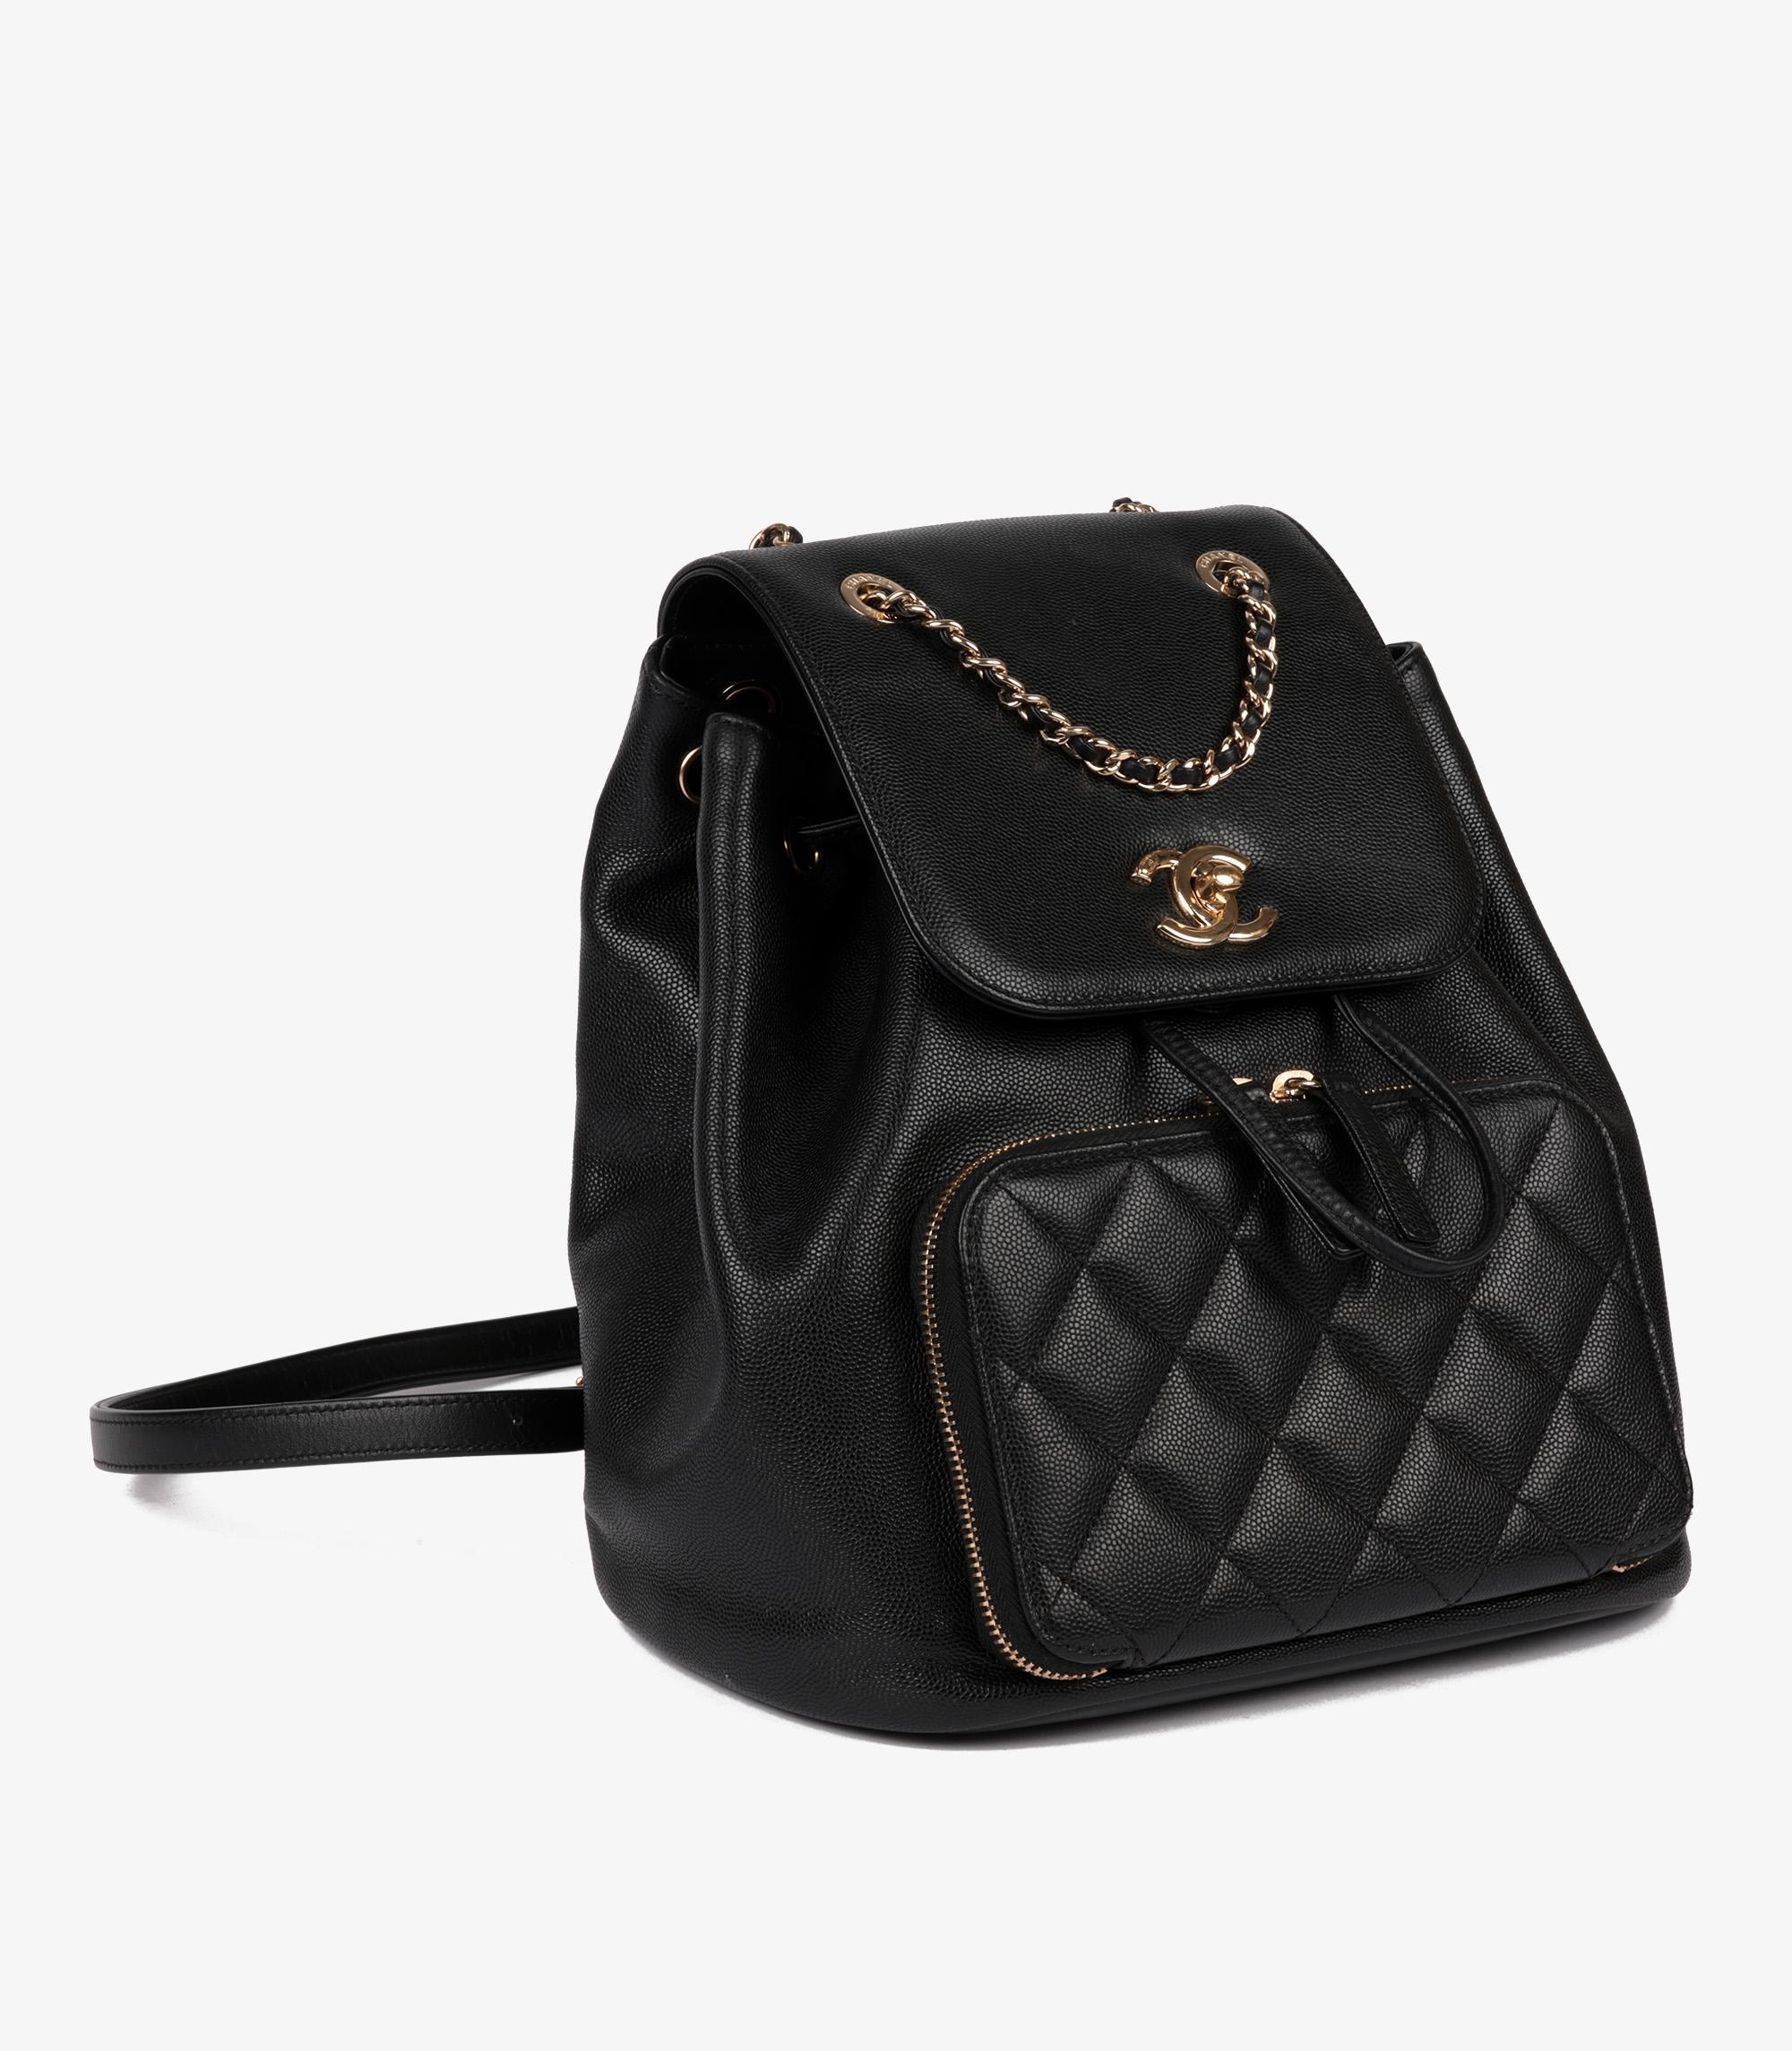 Chanel Black Caviar Leather & Lambskin Affinity Backpack In Excellent Condition For Sale In Bishop's Stortford, Hertfordshire